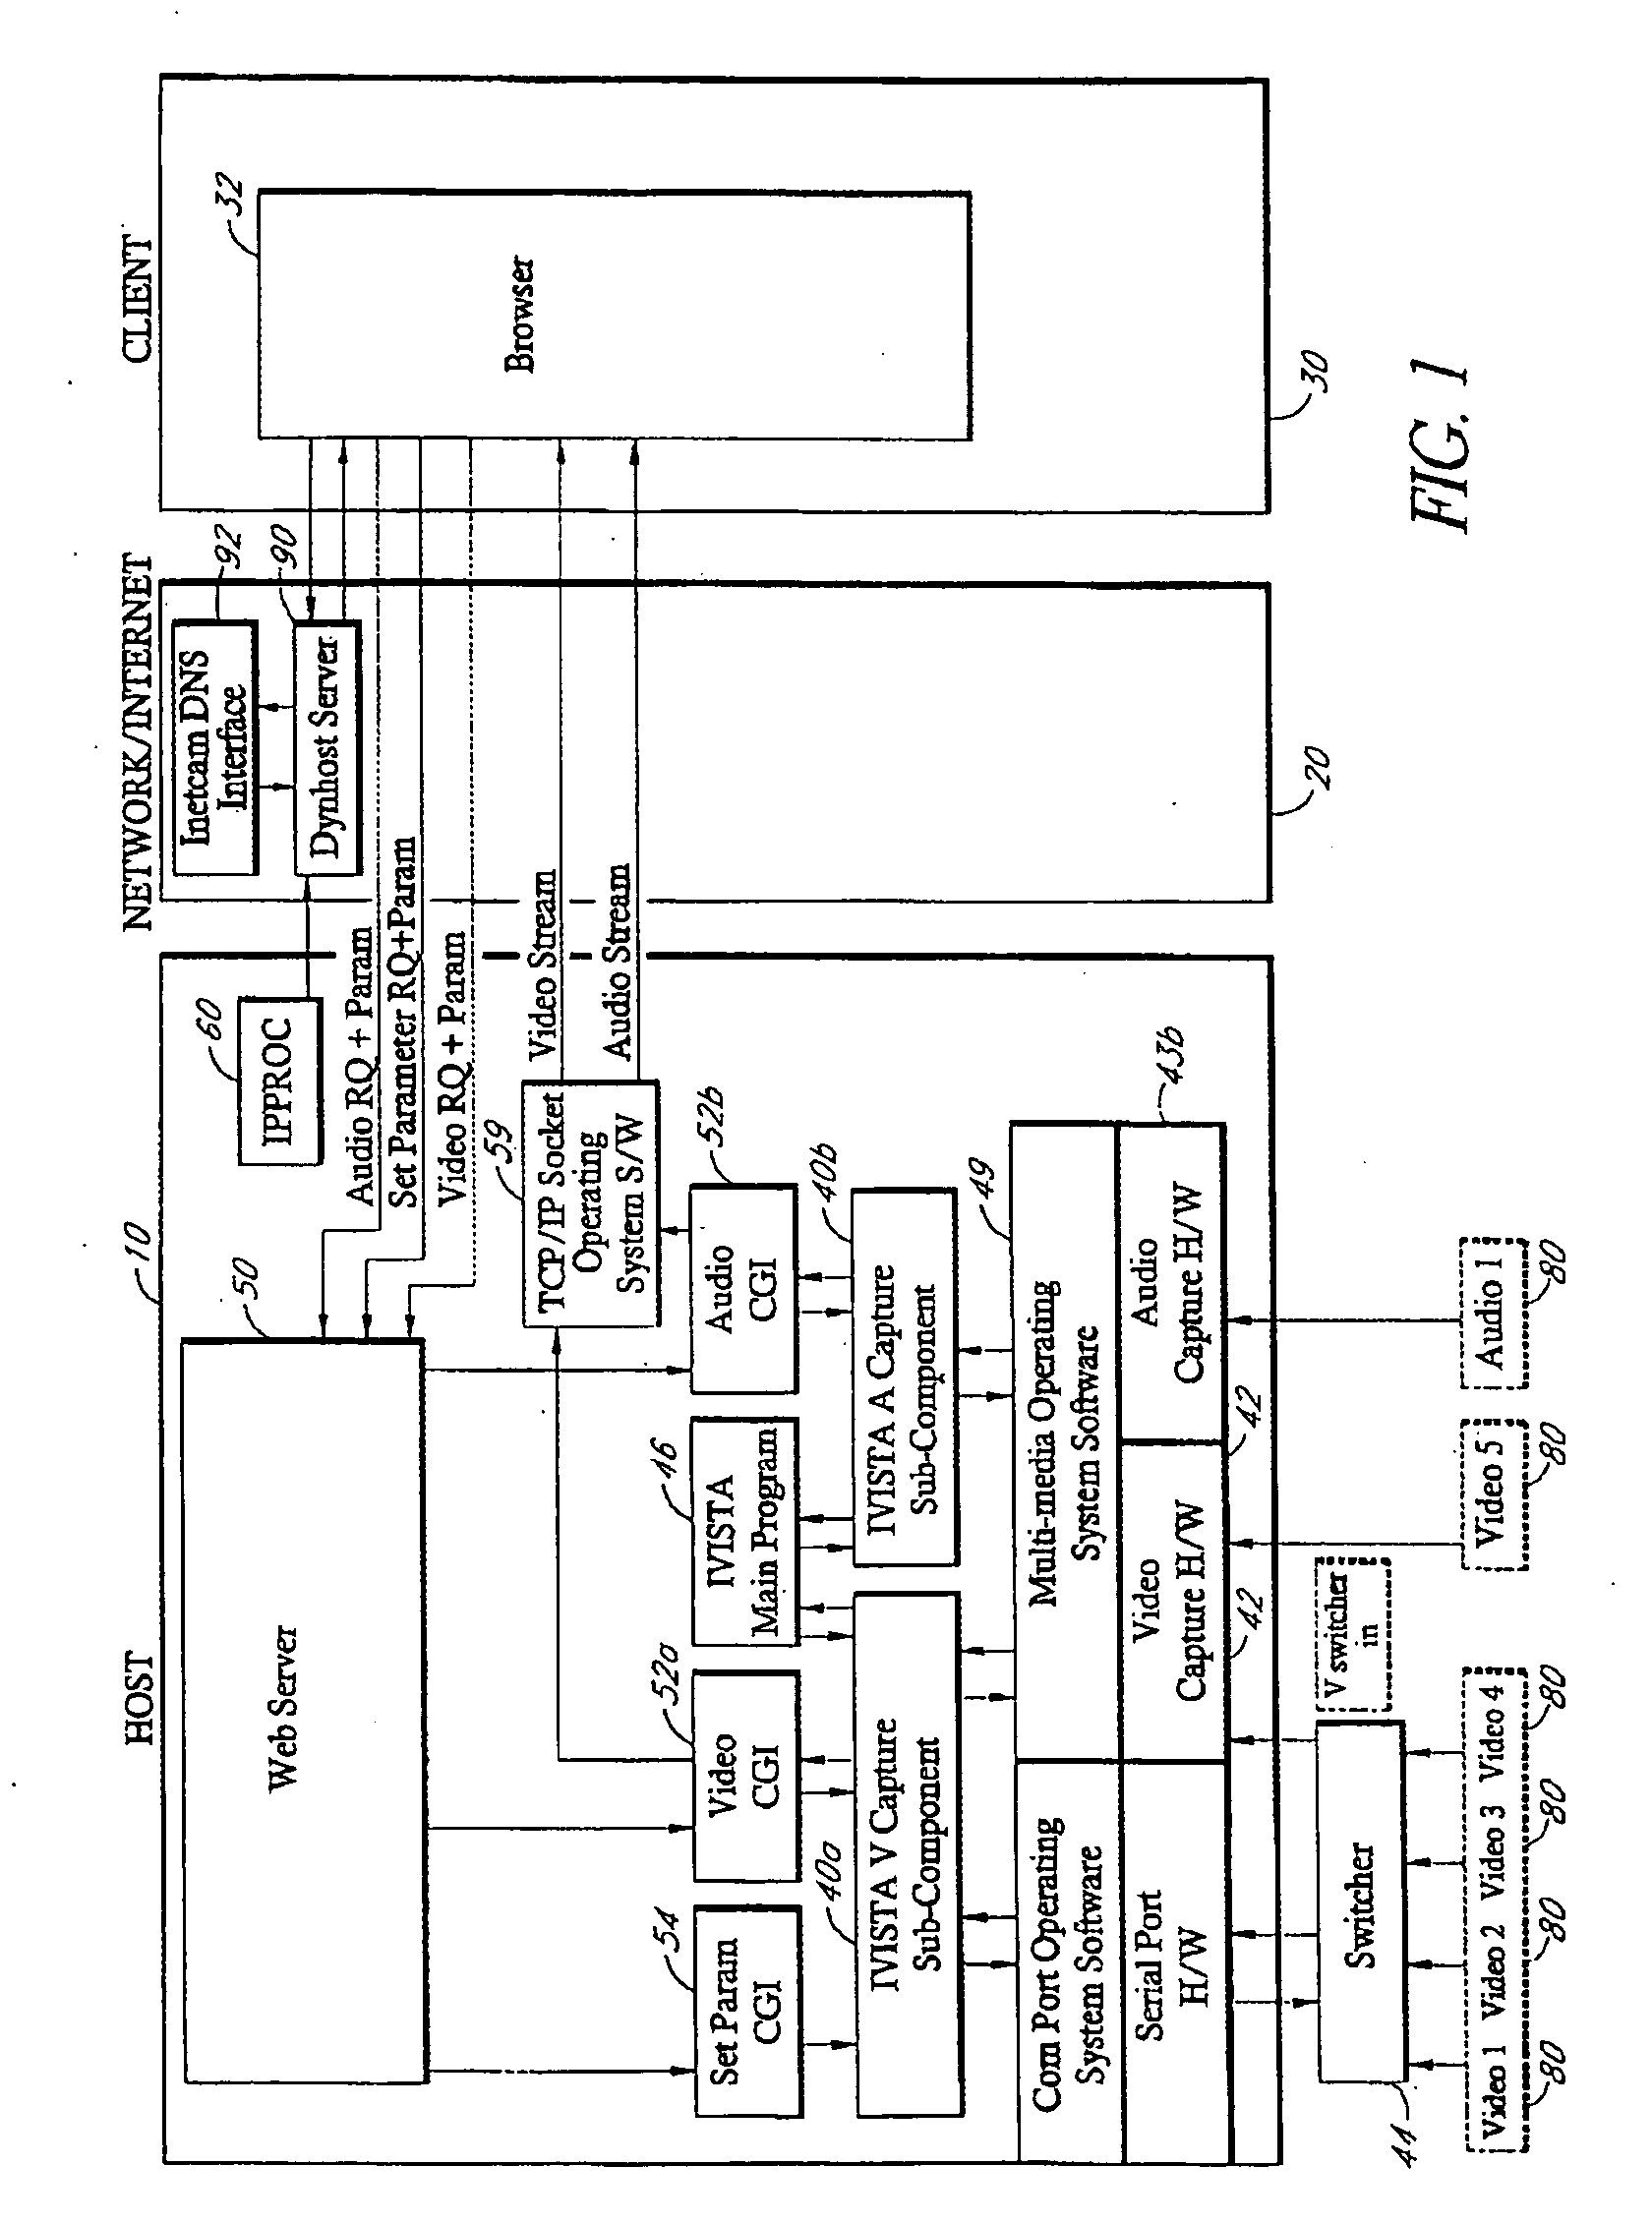 Method and apparatus for distributing multimedia to remote clients